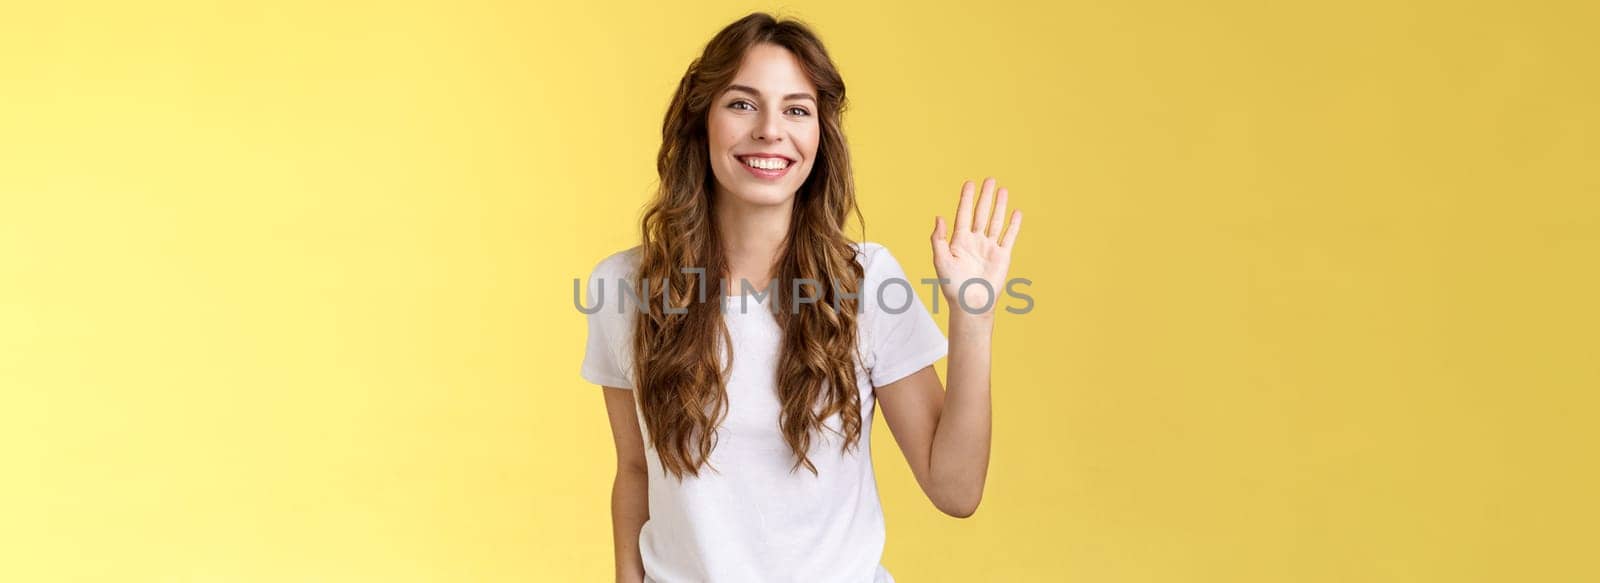 Outgoing comfortable relaxed friendly casual european woman curly haircut waving raised palm say hello introduce herself become new member smiling broadly greeting hi gesture yellow background. Lifestyle.